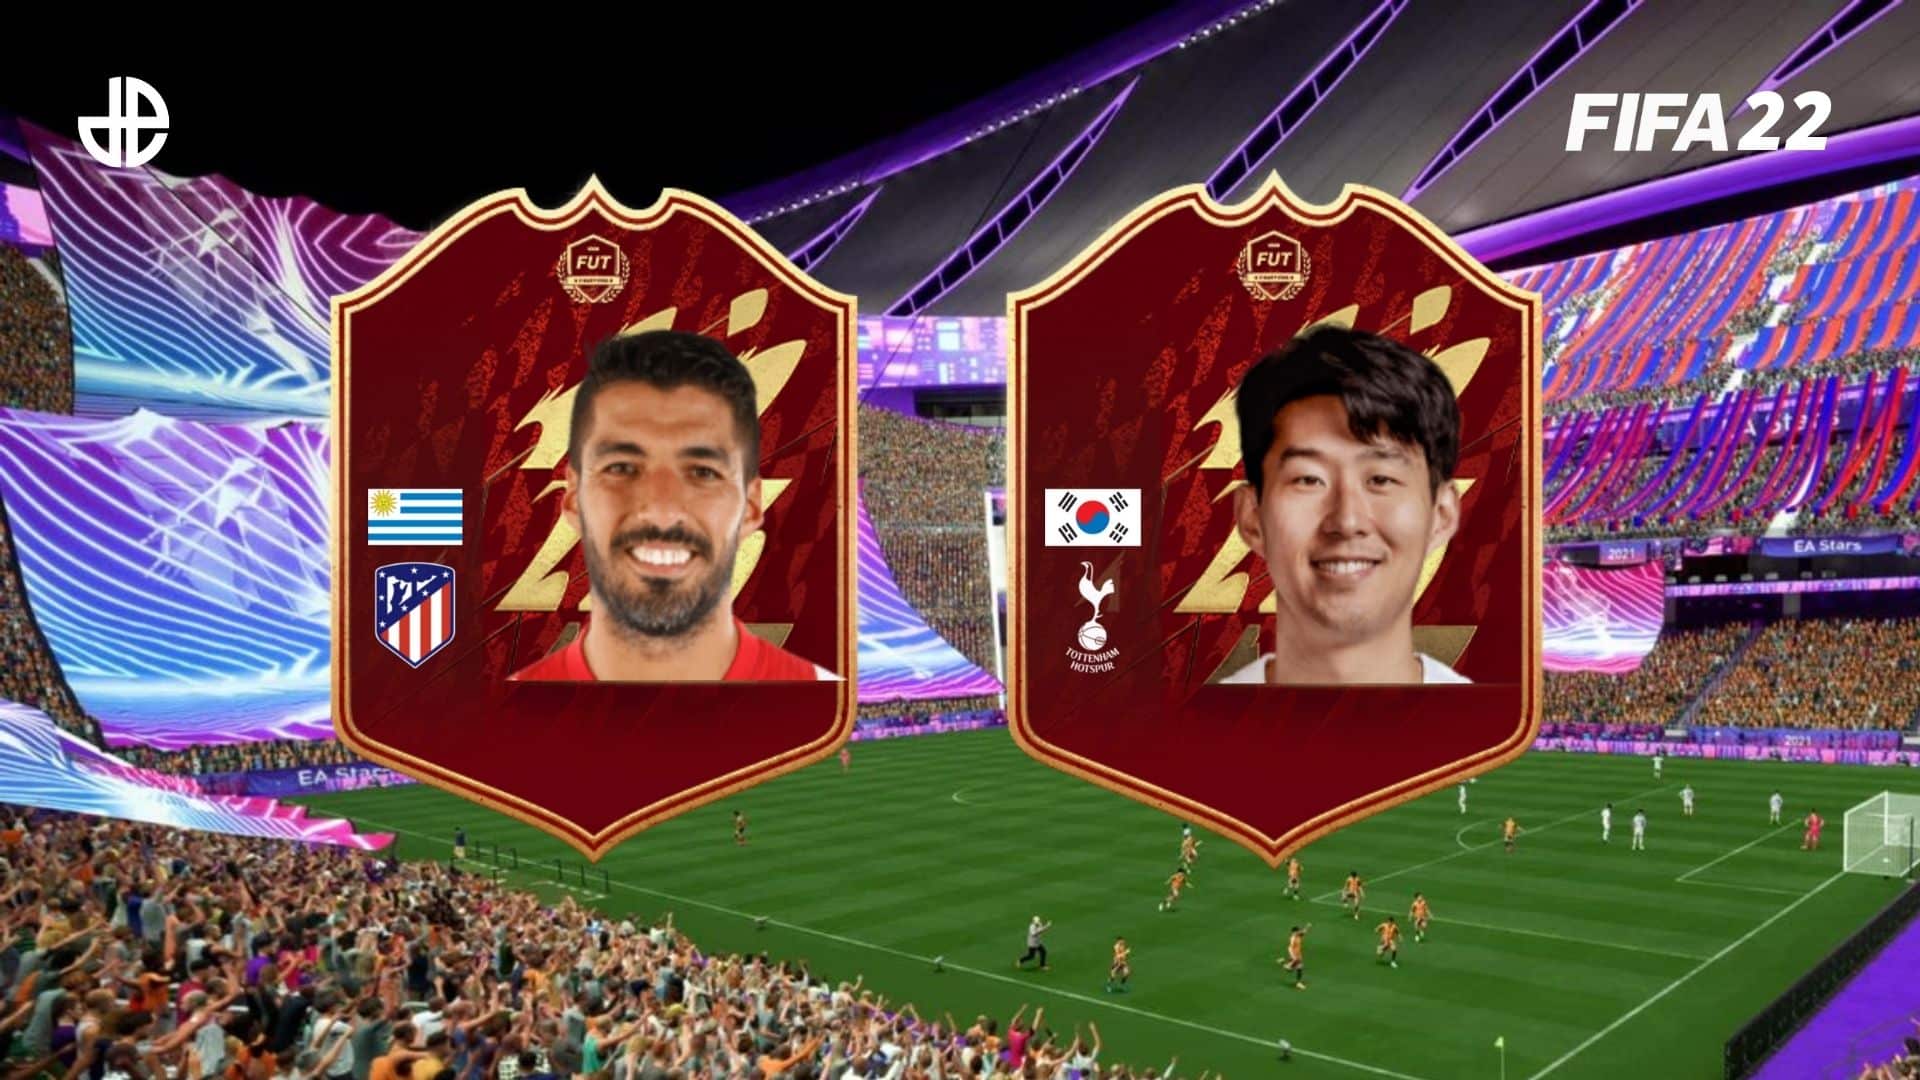 FIFA 22 red player cards for Luis Suarez and Son